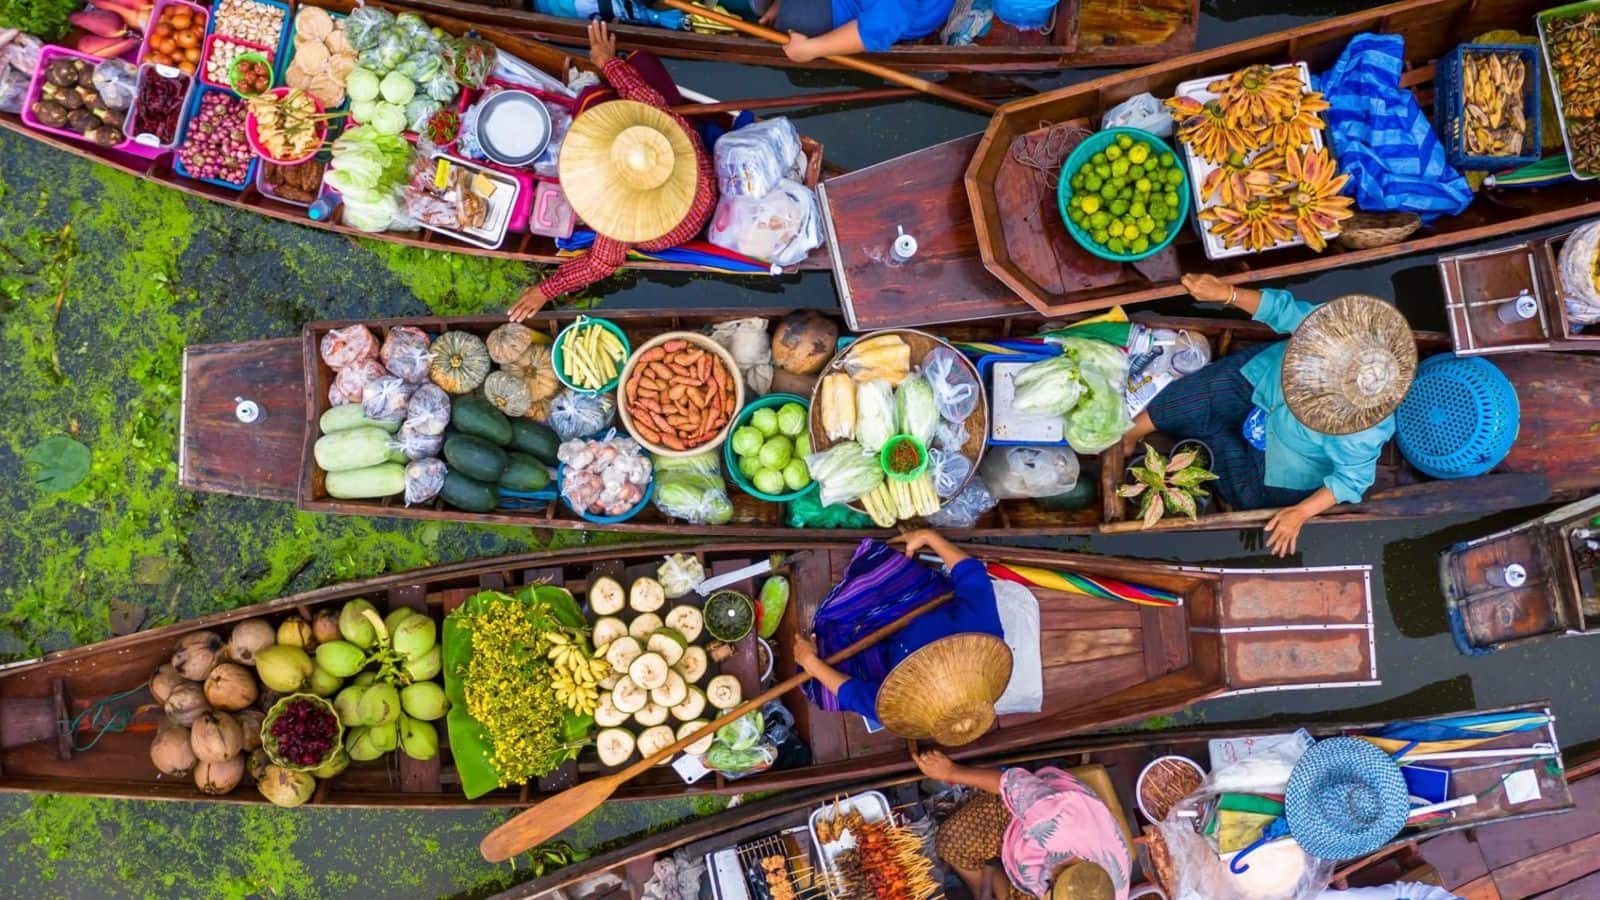 Recommendations for a memorable floating market adventure in Bangkok